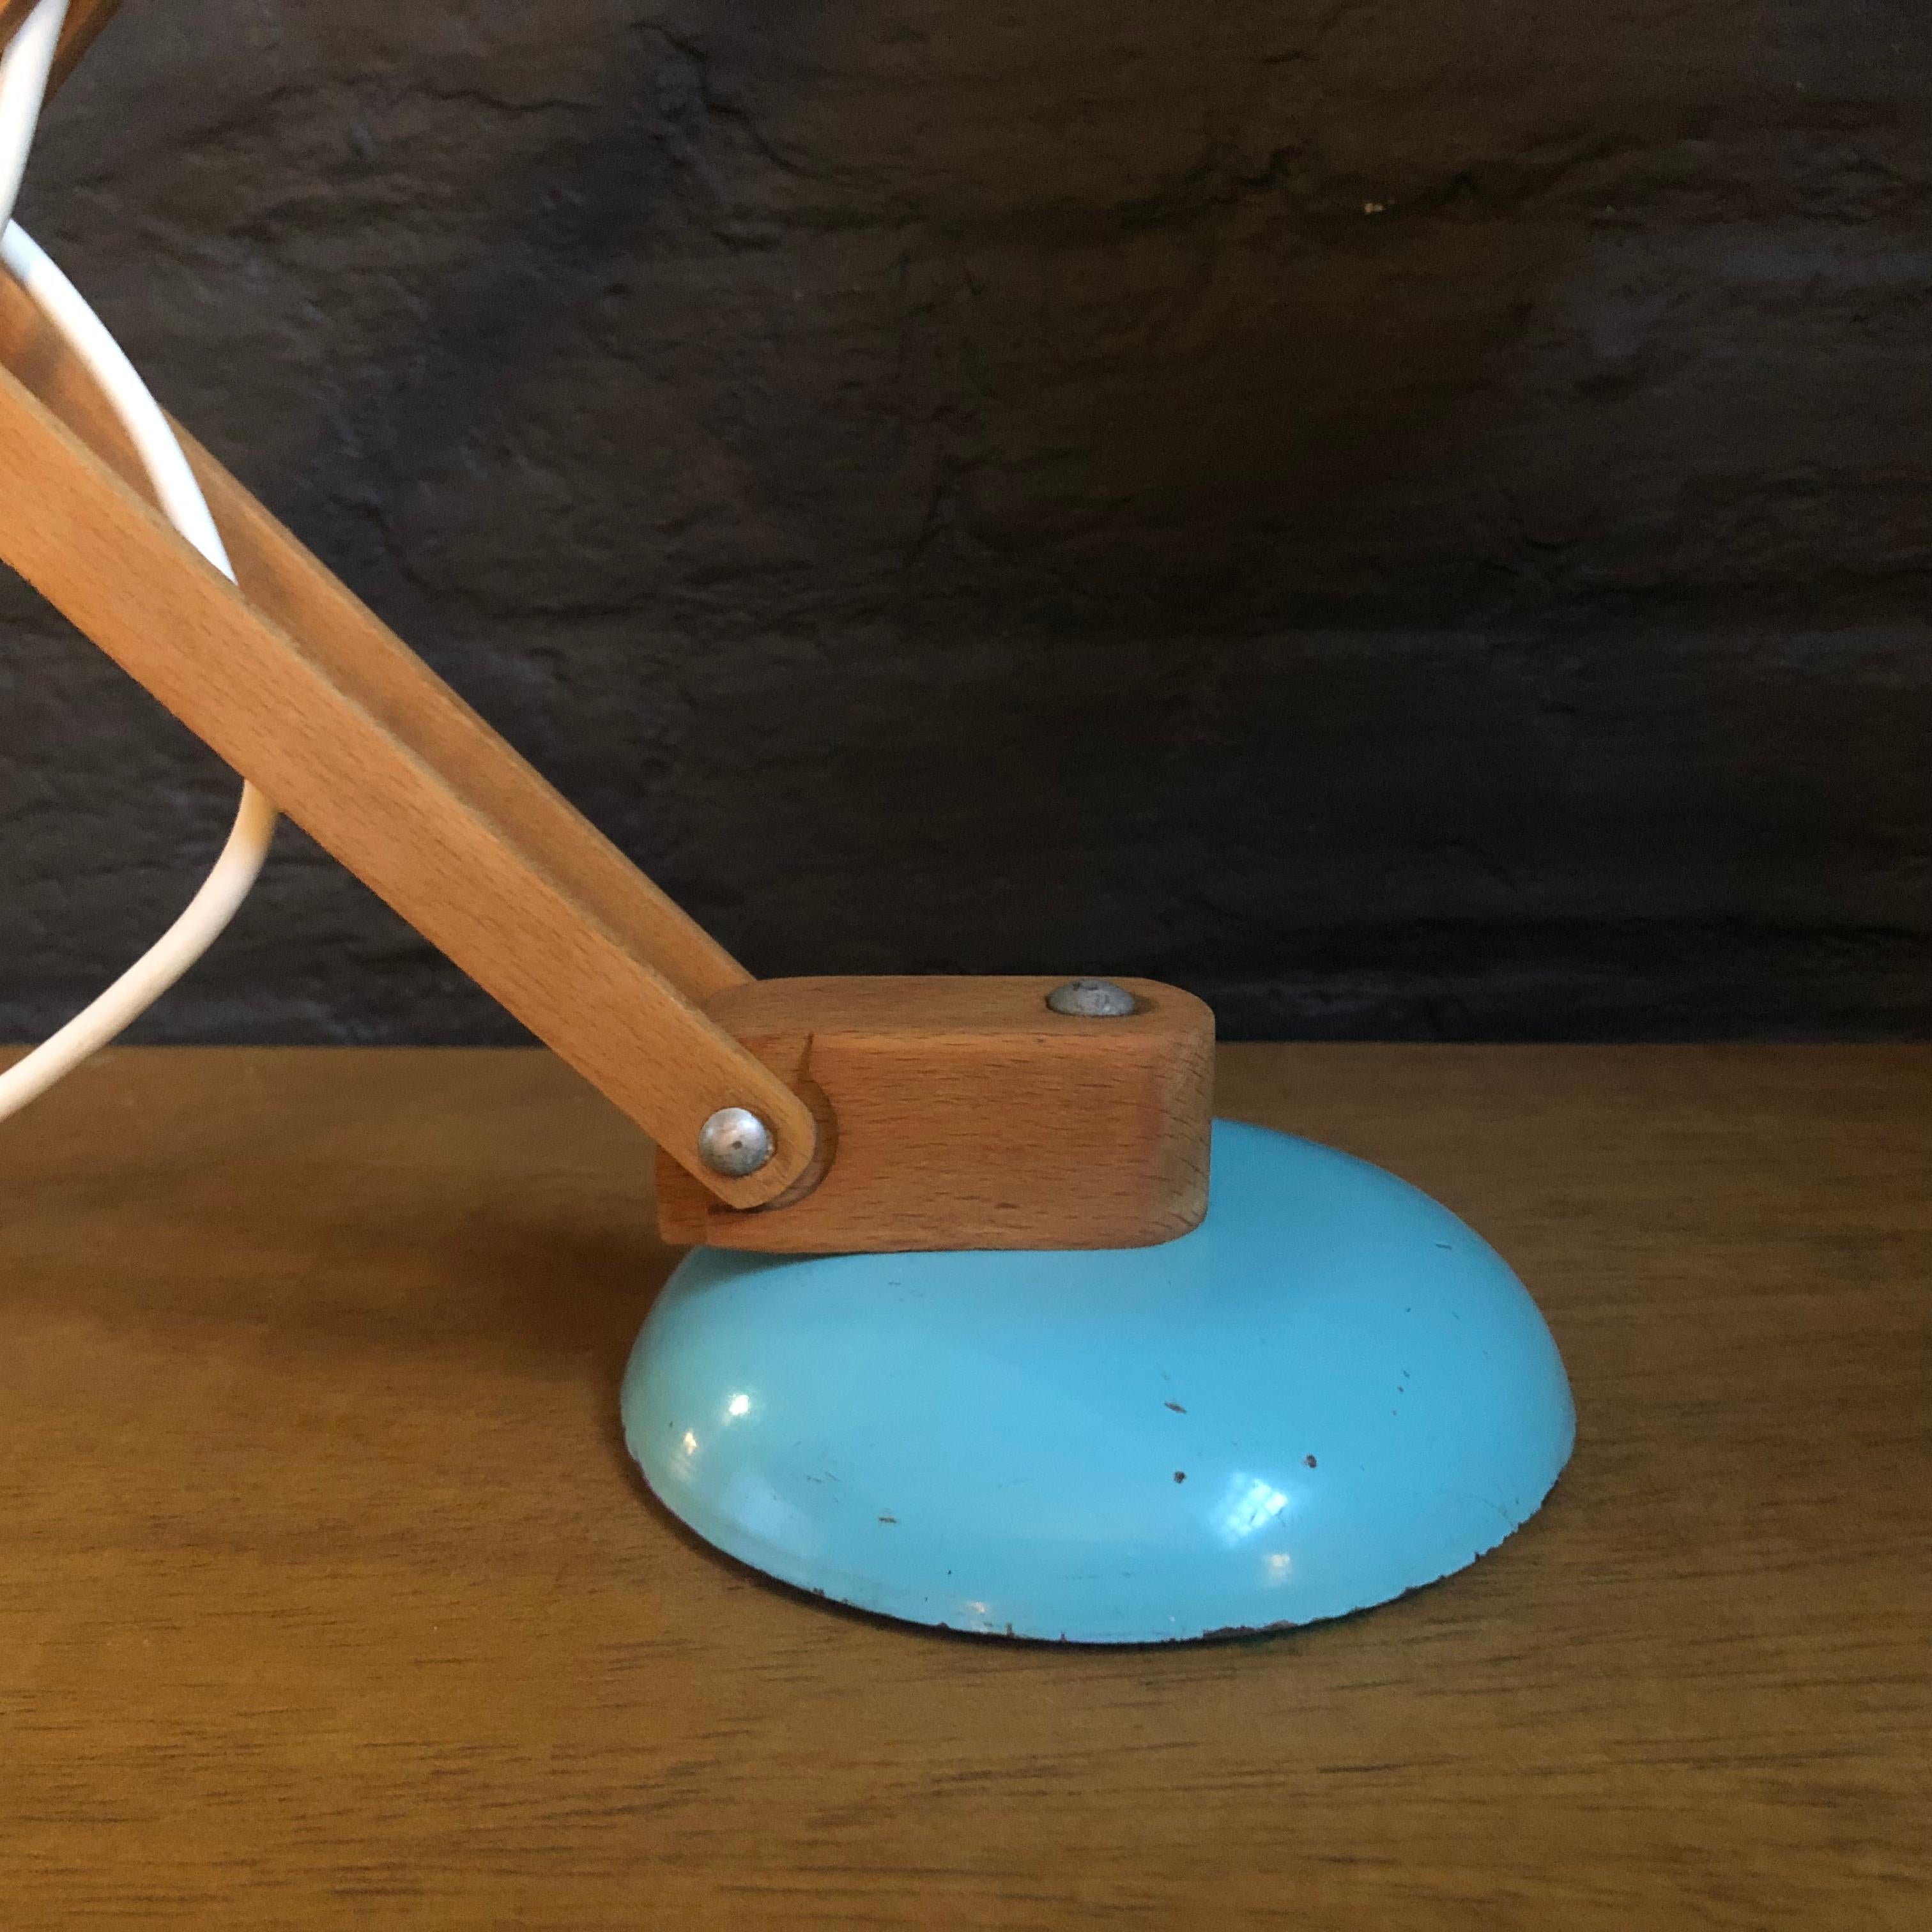 English Vintage Midcentury Maclamp by Terence Conran Desk Lamp in Turquoise